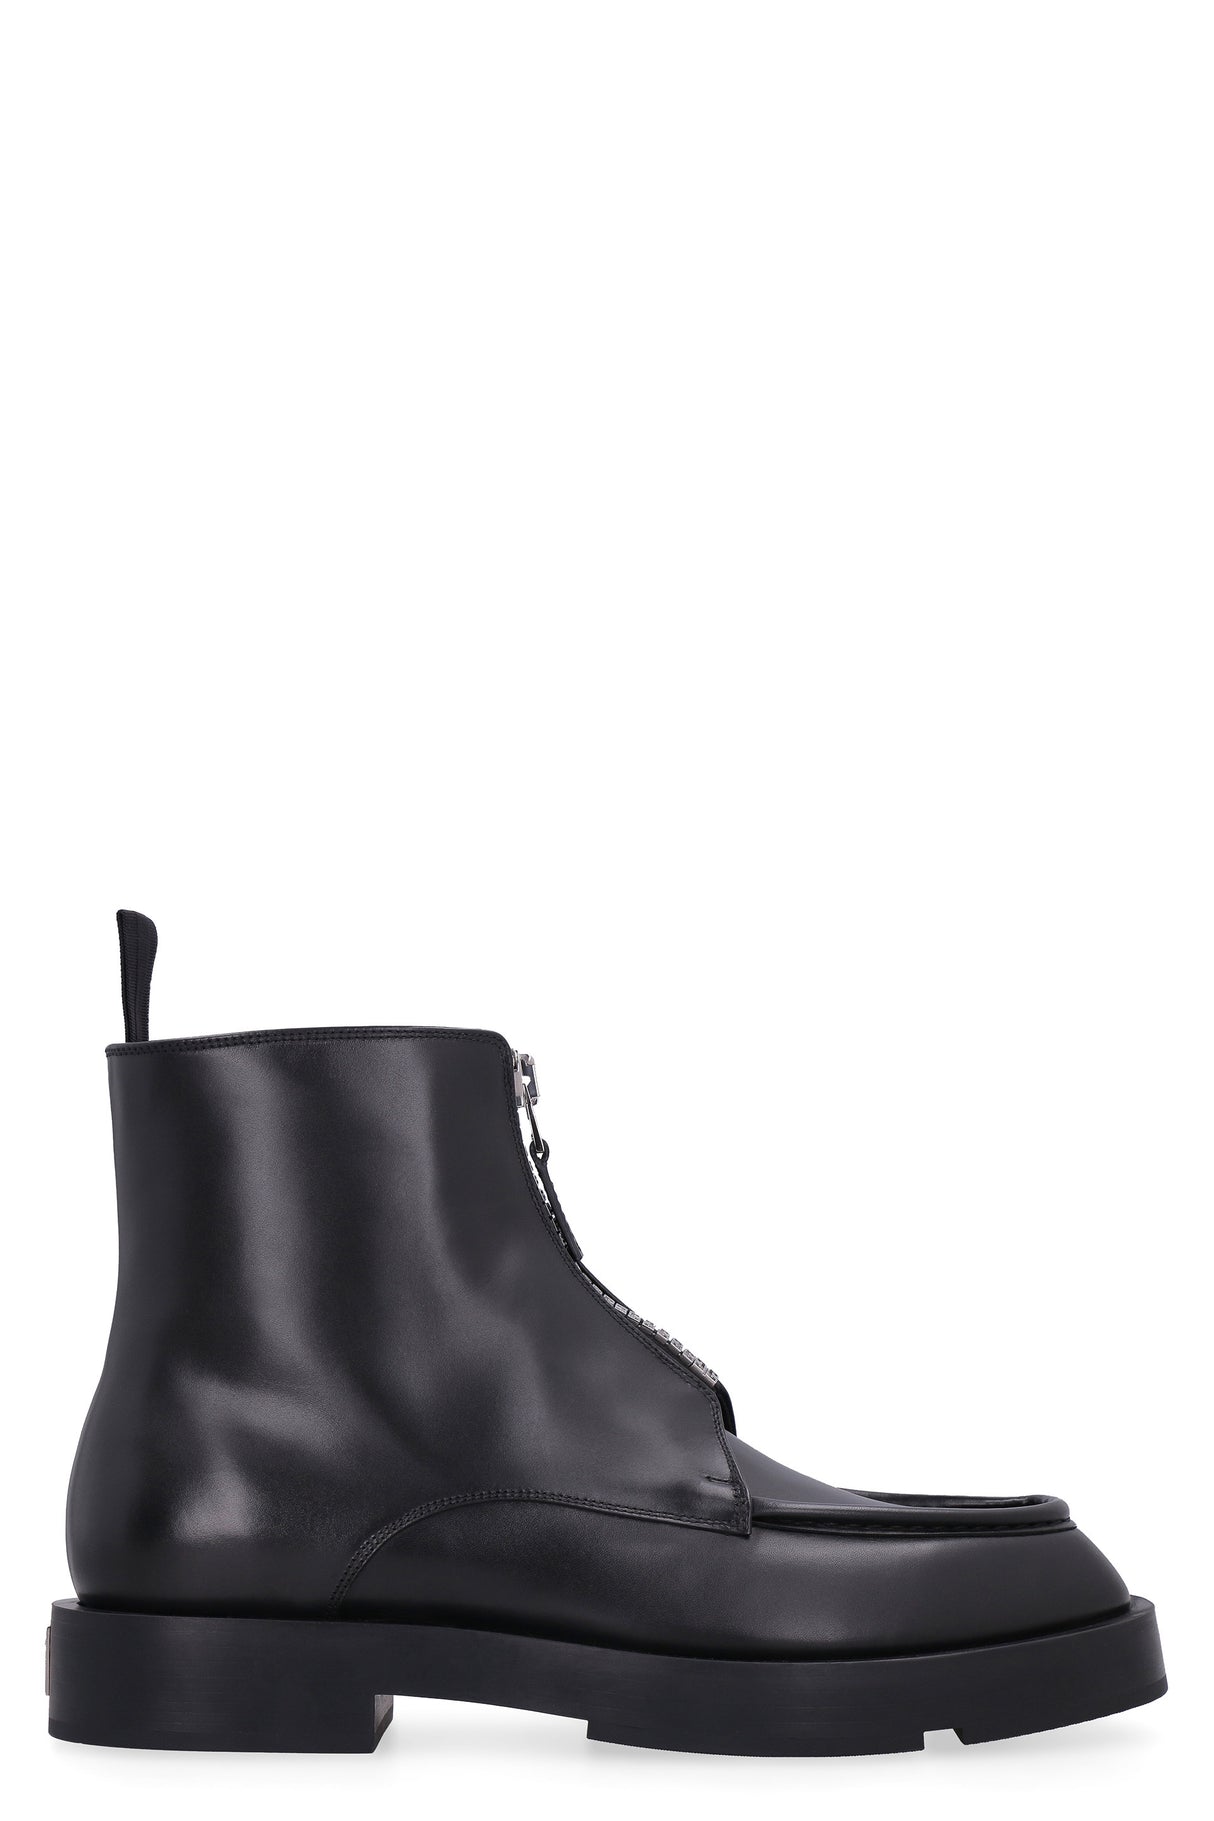 GIVENCHY Stylish Black Leather Ankle Boots for Men - FW22